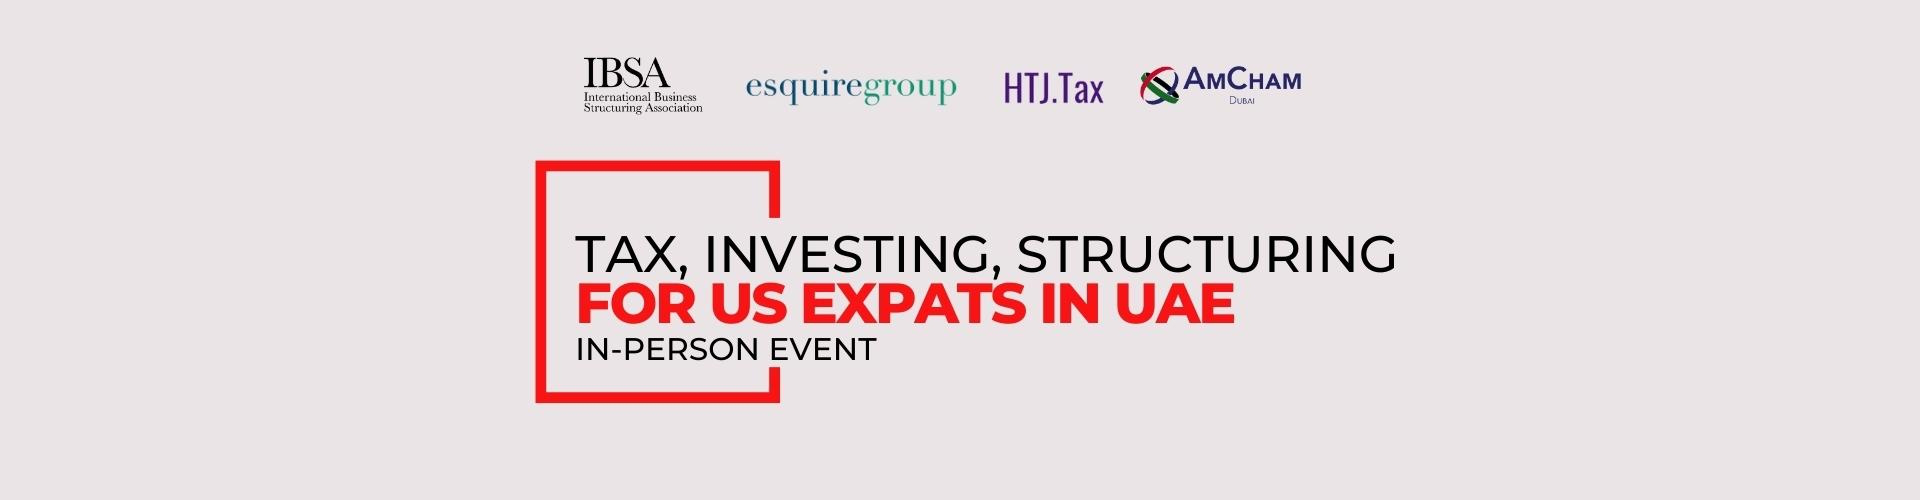 thumbnails Tax, Investing, Structuring for US Expats in the UAE